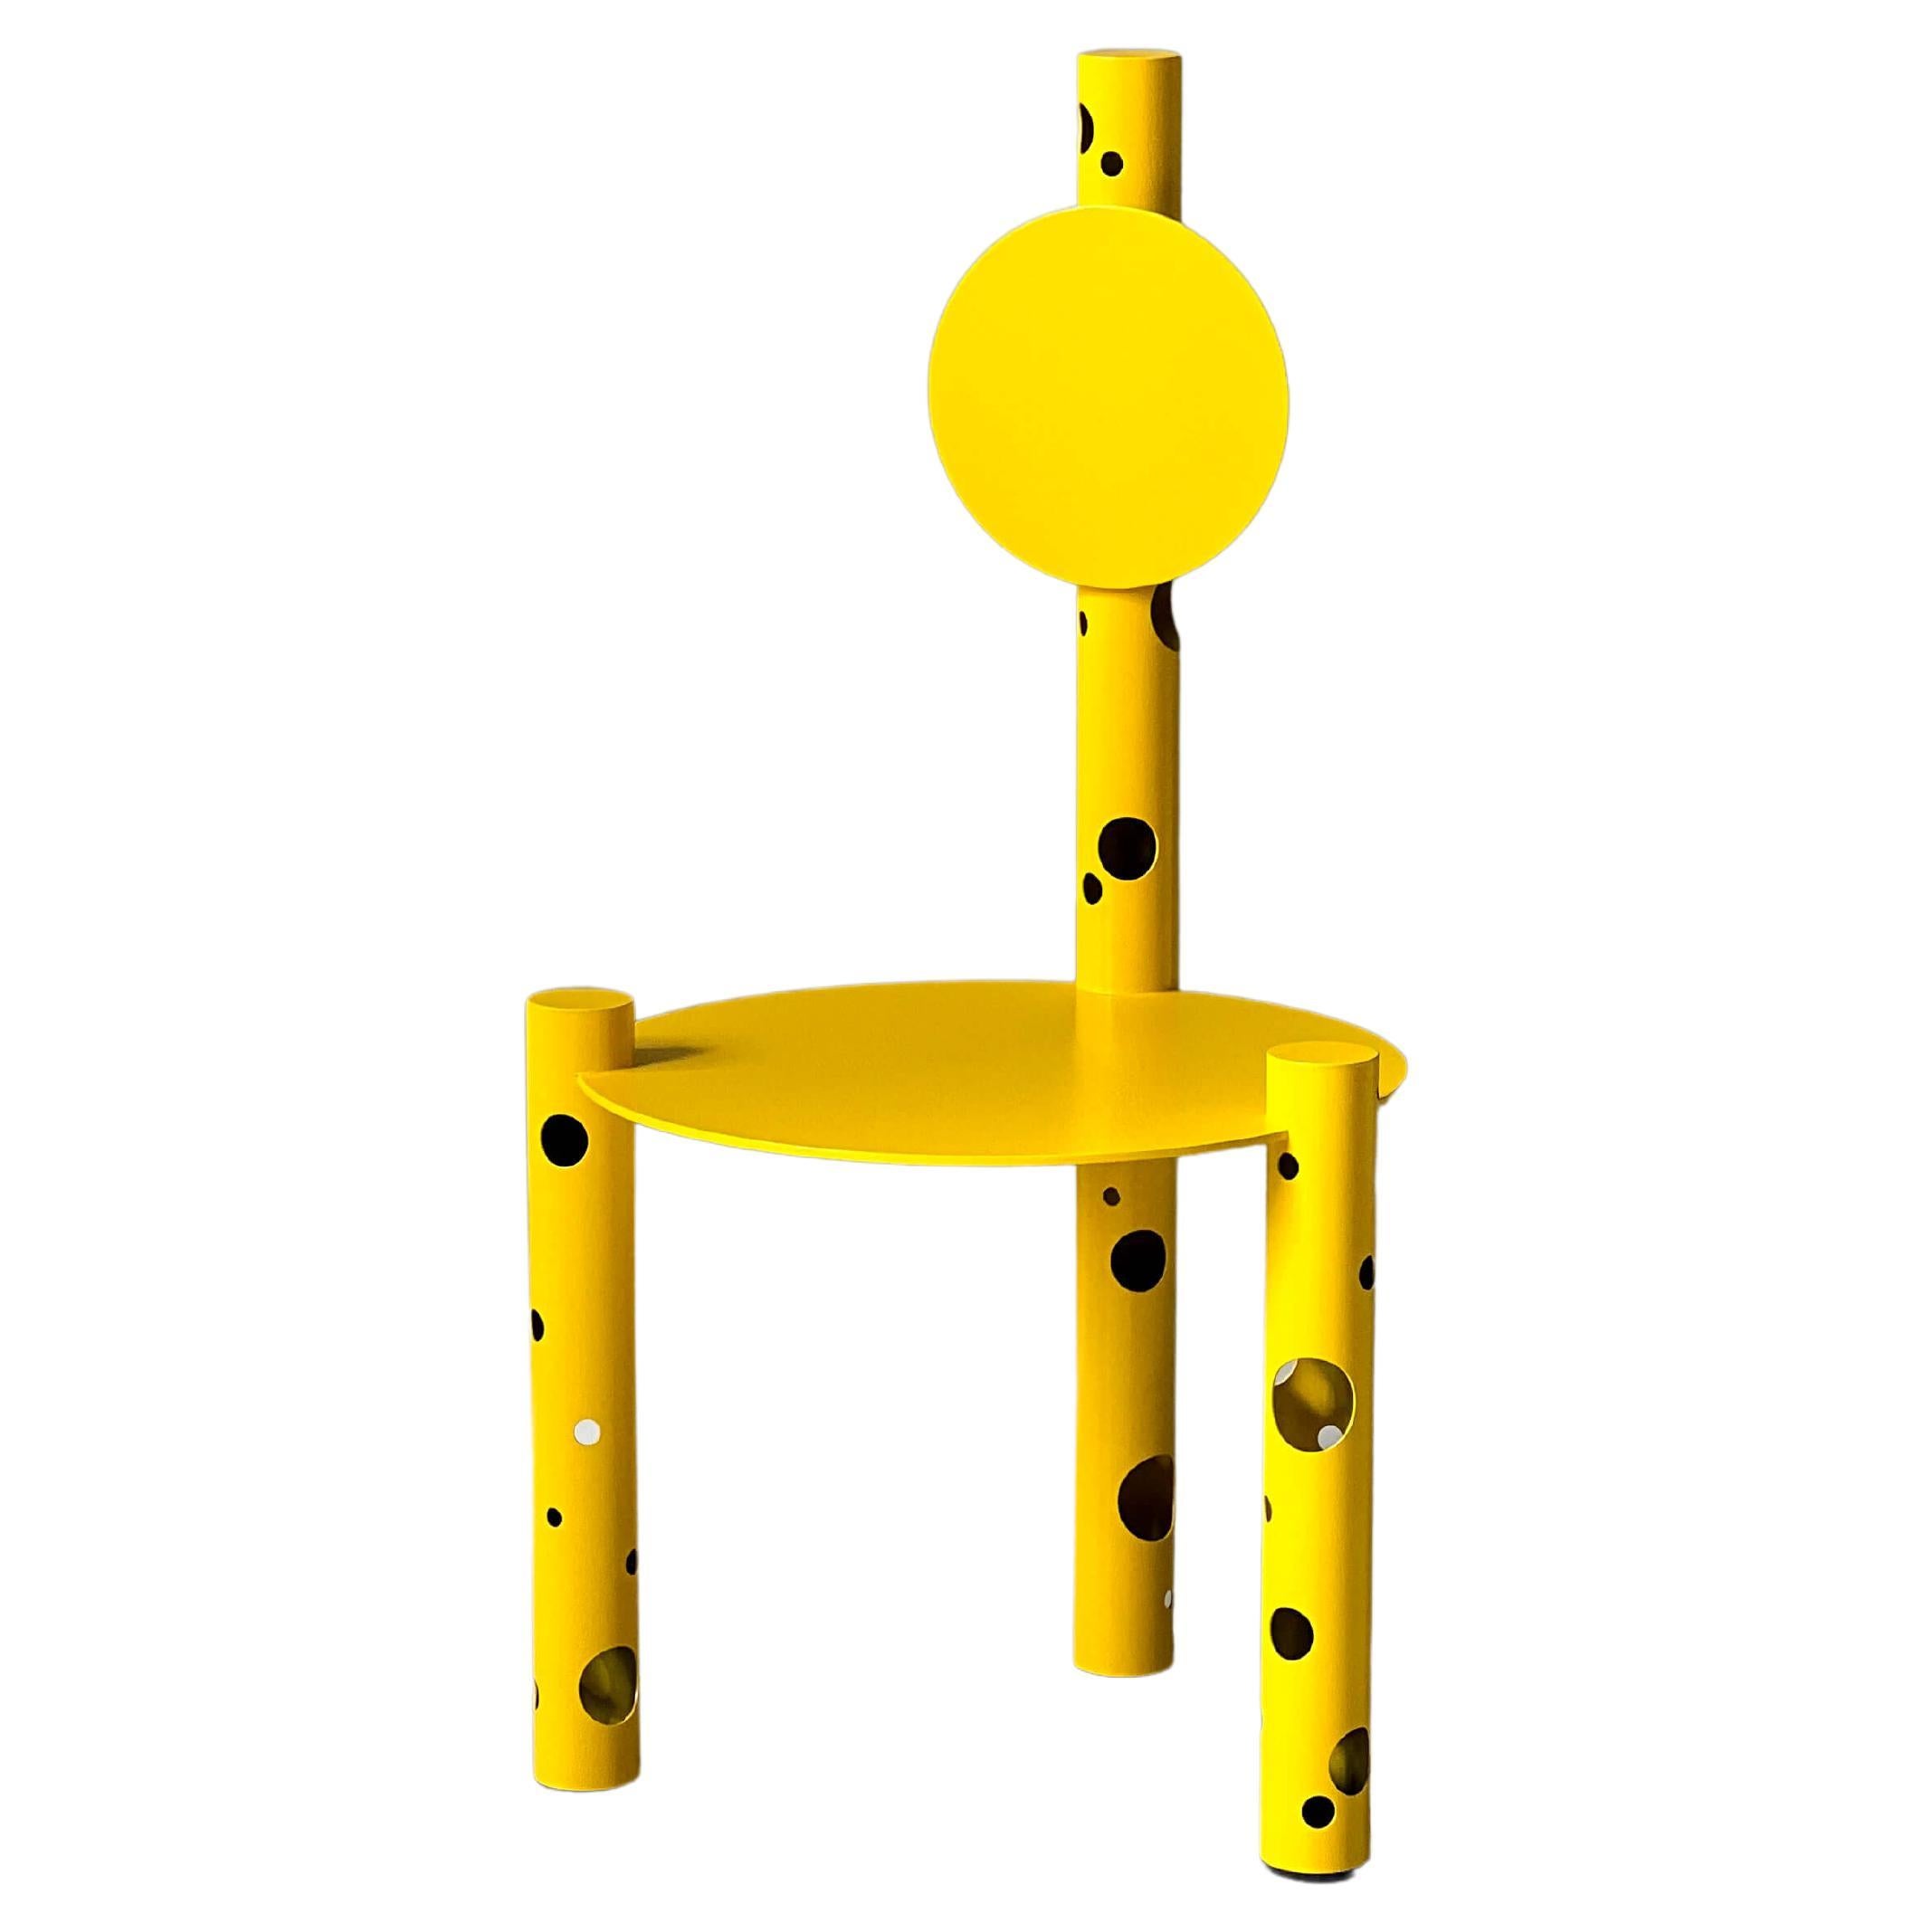 Spinzi SIlös Chair, Collectible Italian Design, Bright Yellow Sculptural Seating For Sale